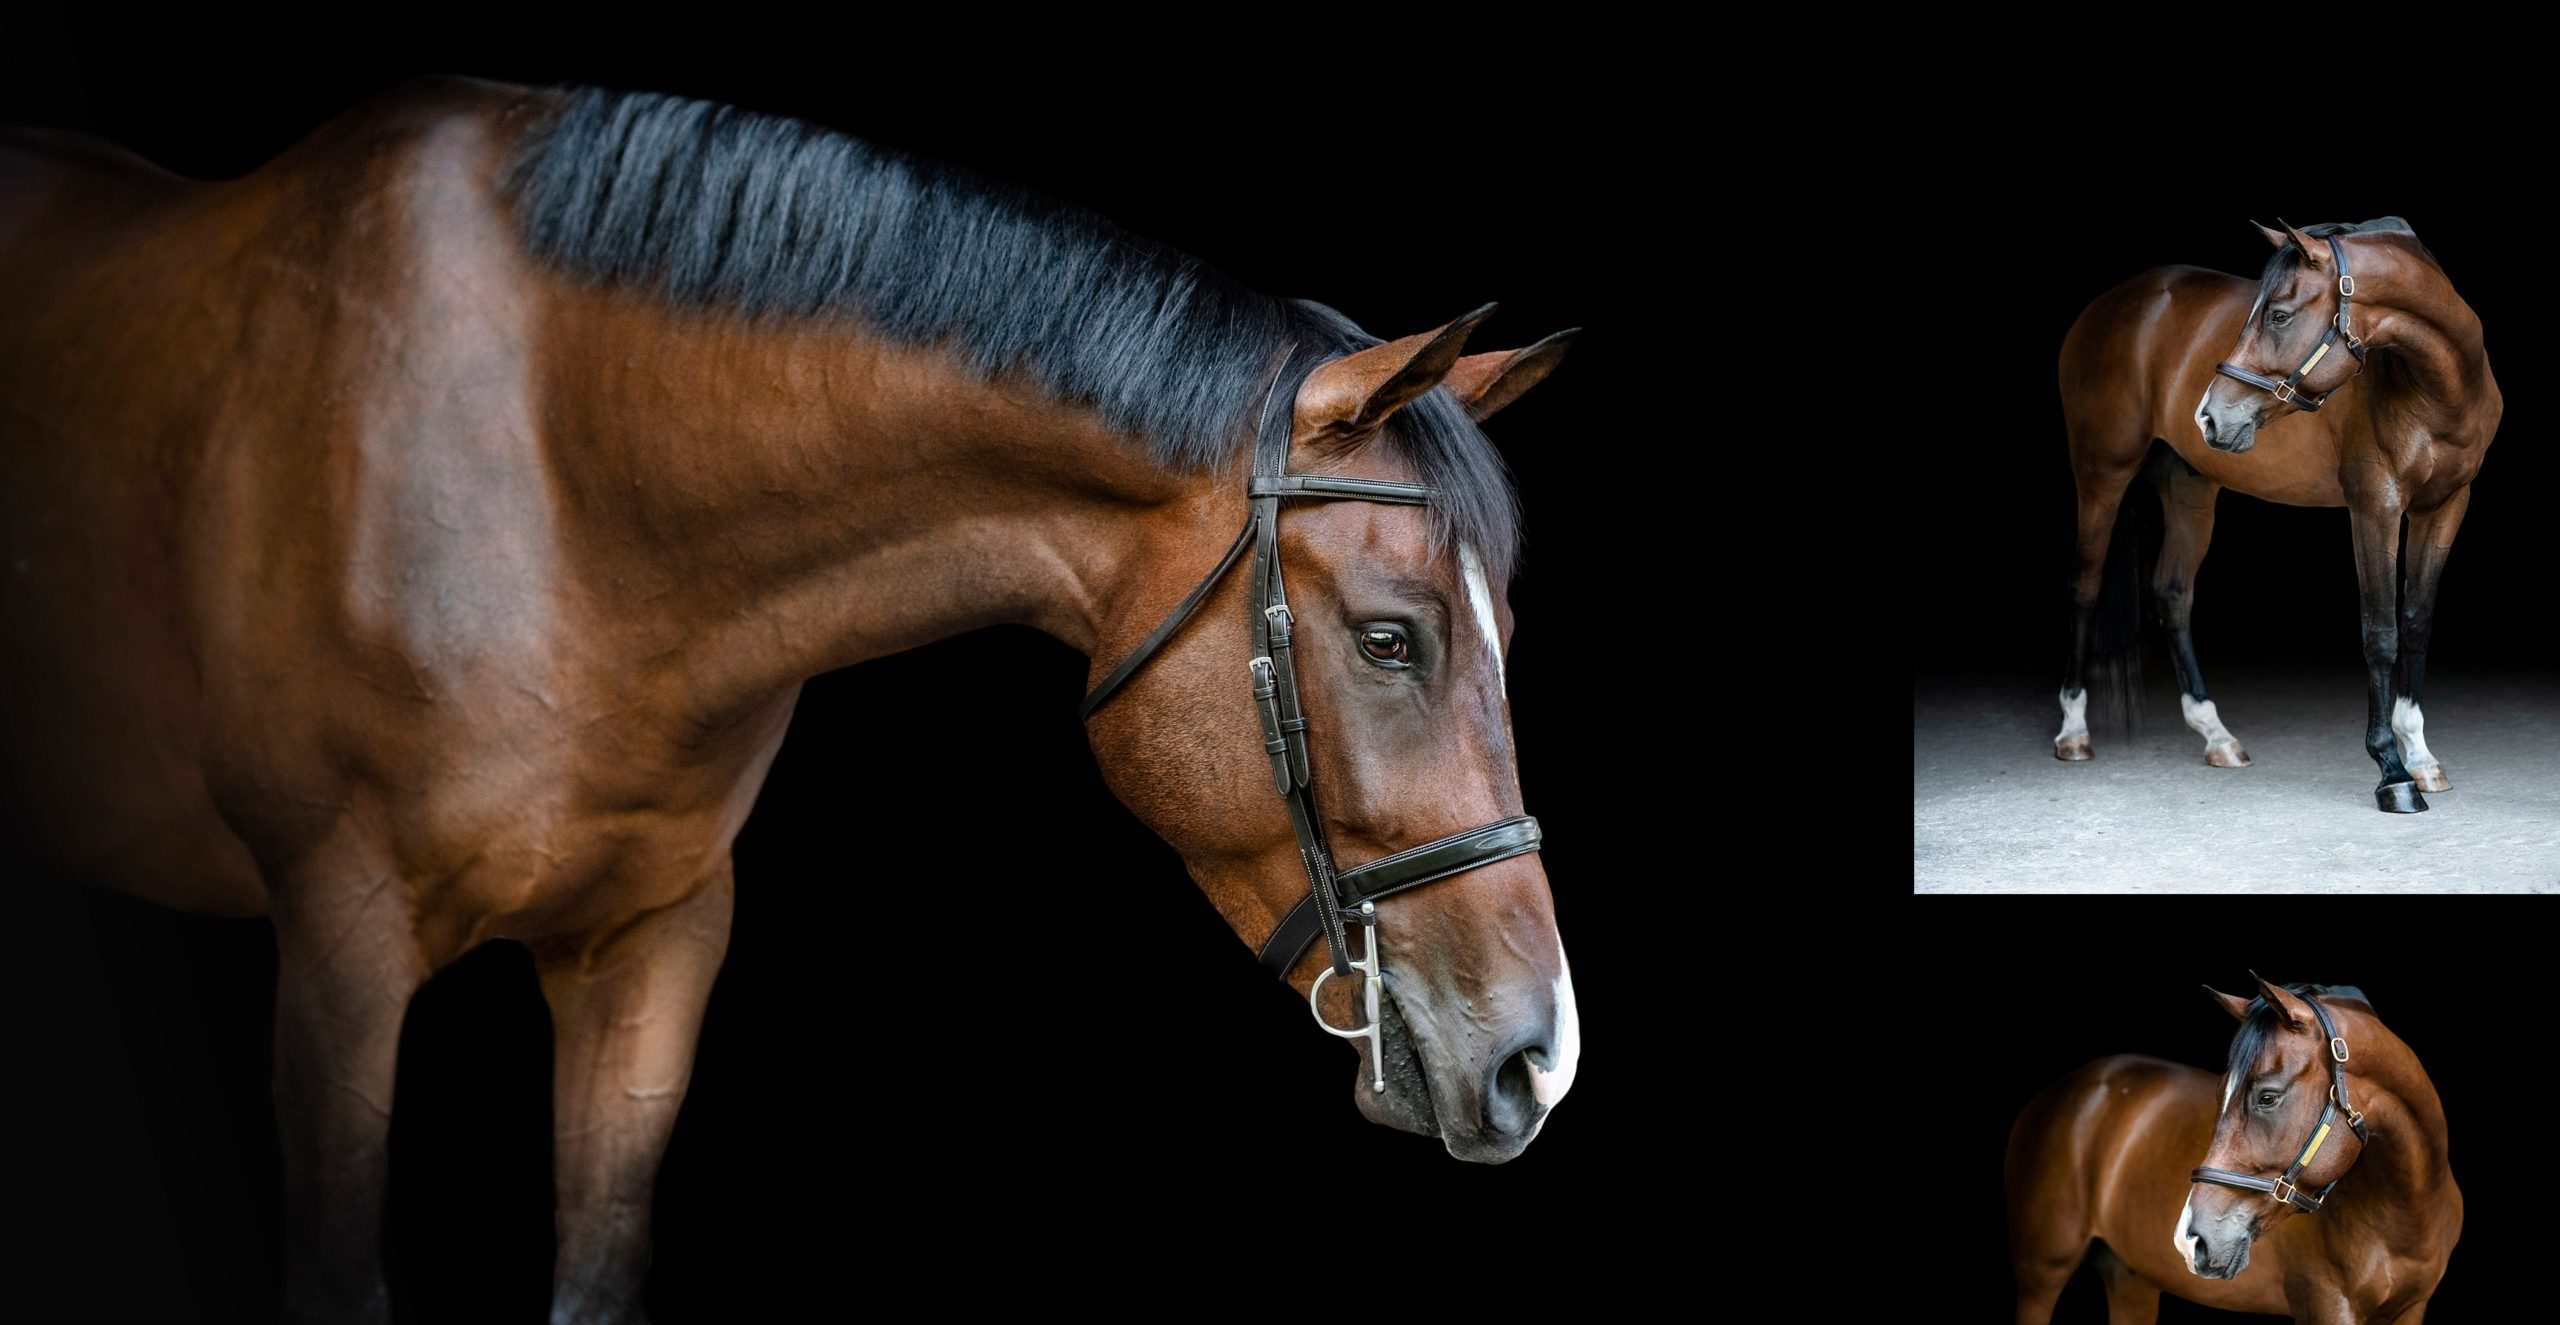 Equine photographer who does black backgrounds in South Georgia.